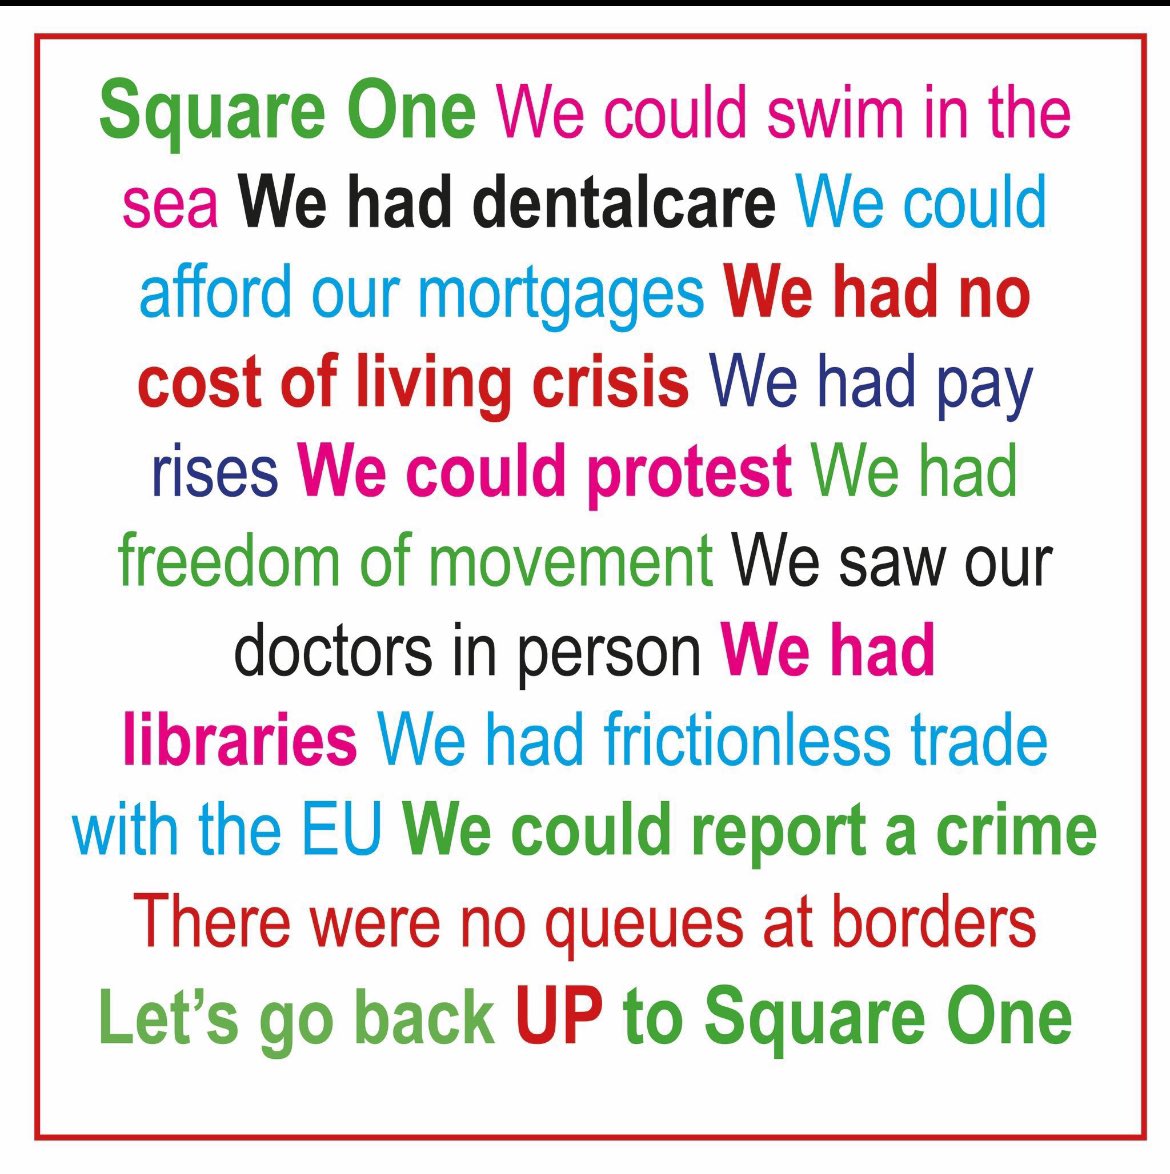 When Tories tell us Labour would return us to square one. This is what square one means. RT it, screenshot it, reply with it, post it